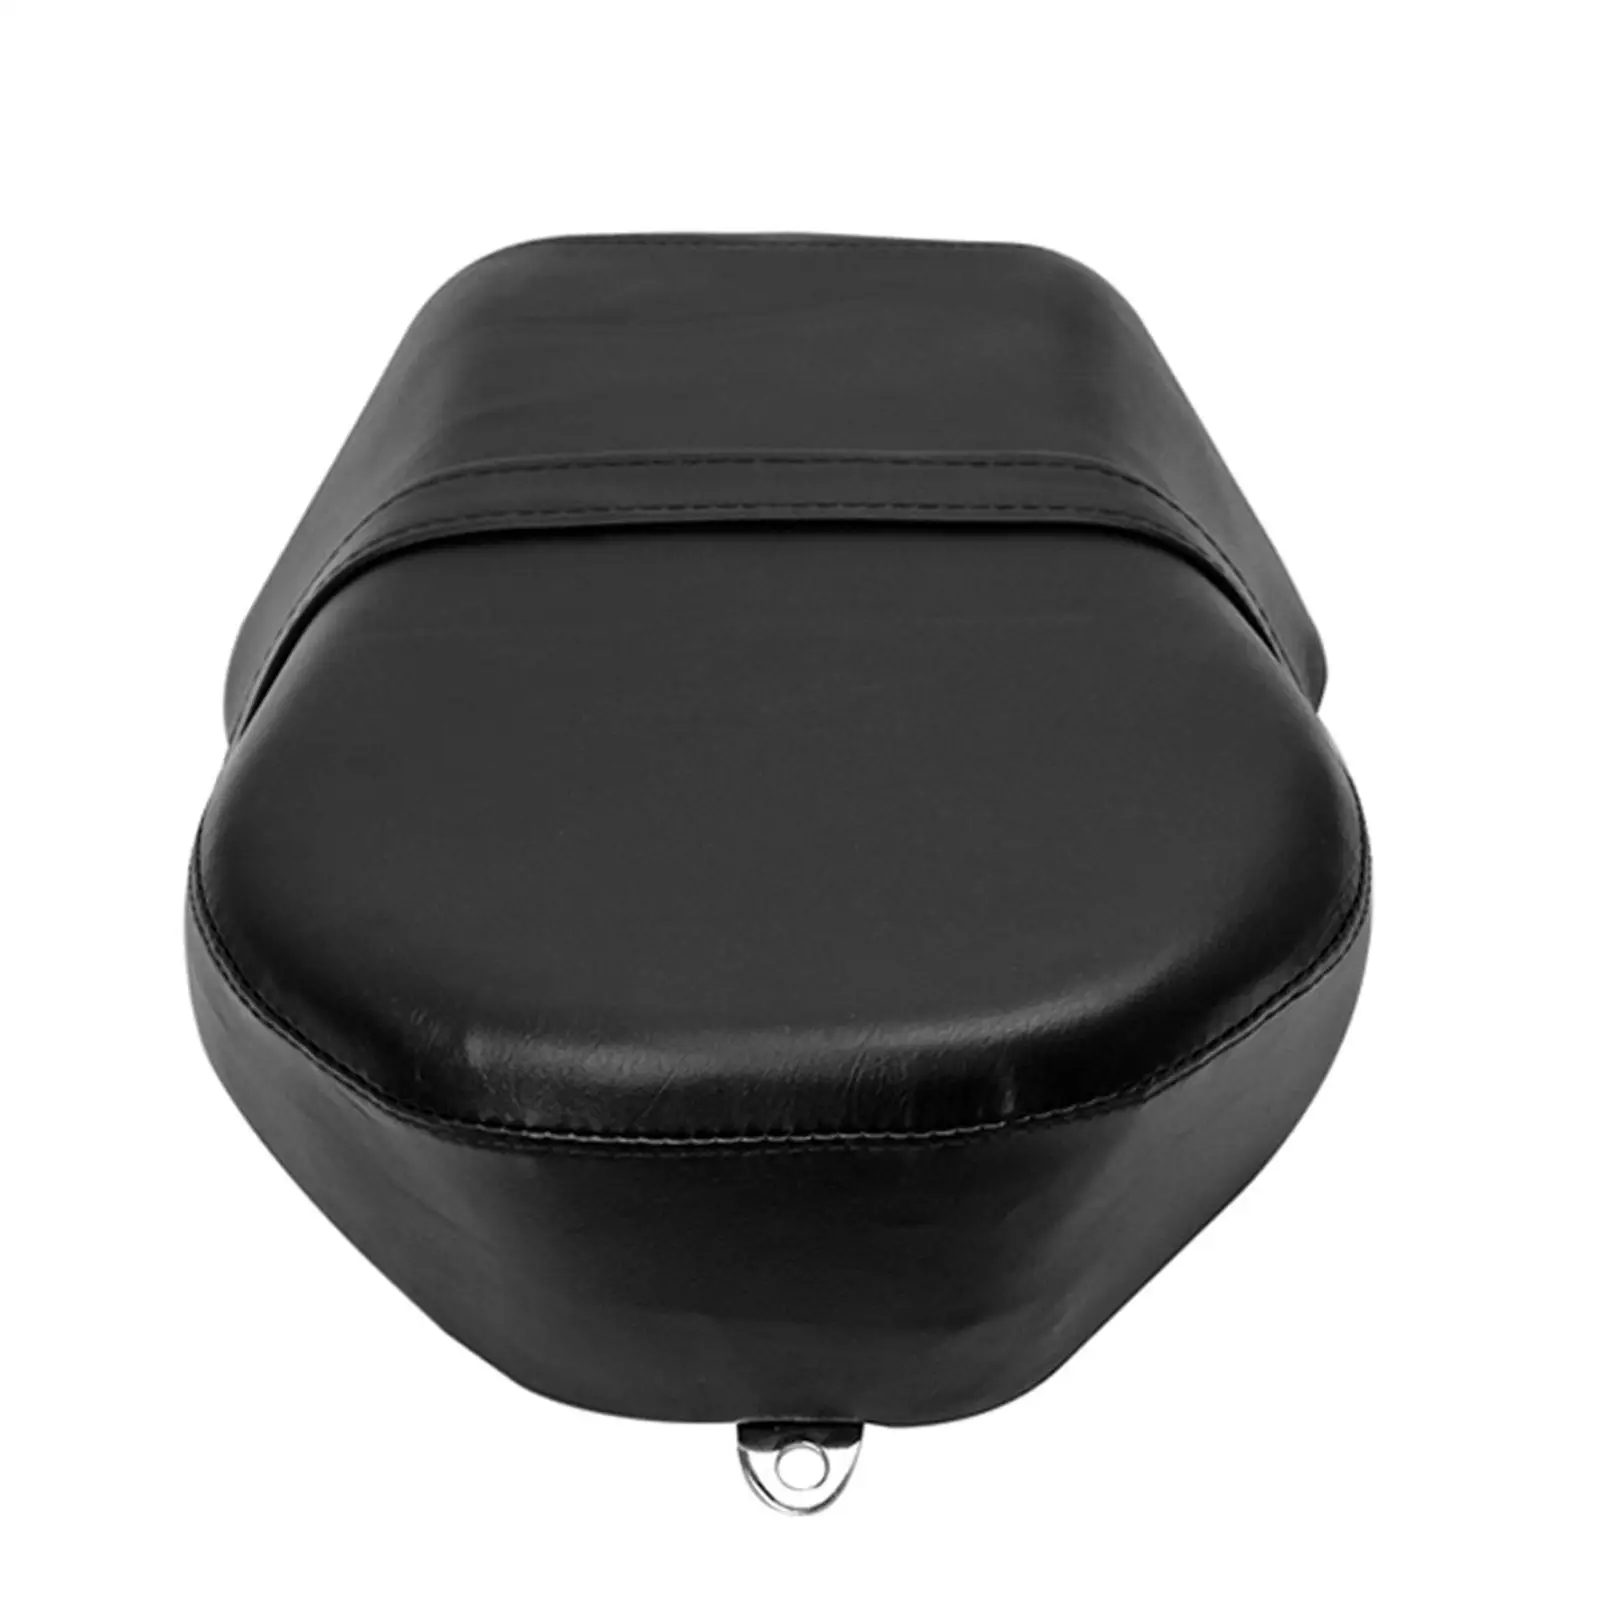 Motorcycle Pillion Passenger Pad Black for Harley Sportster Spare Parts